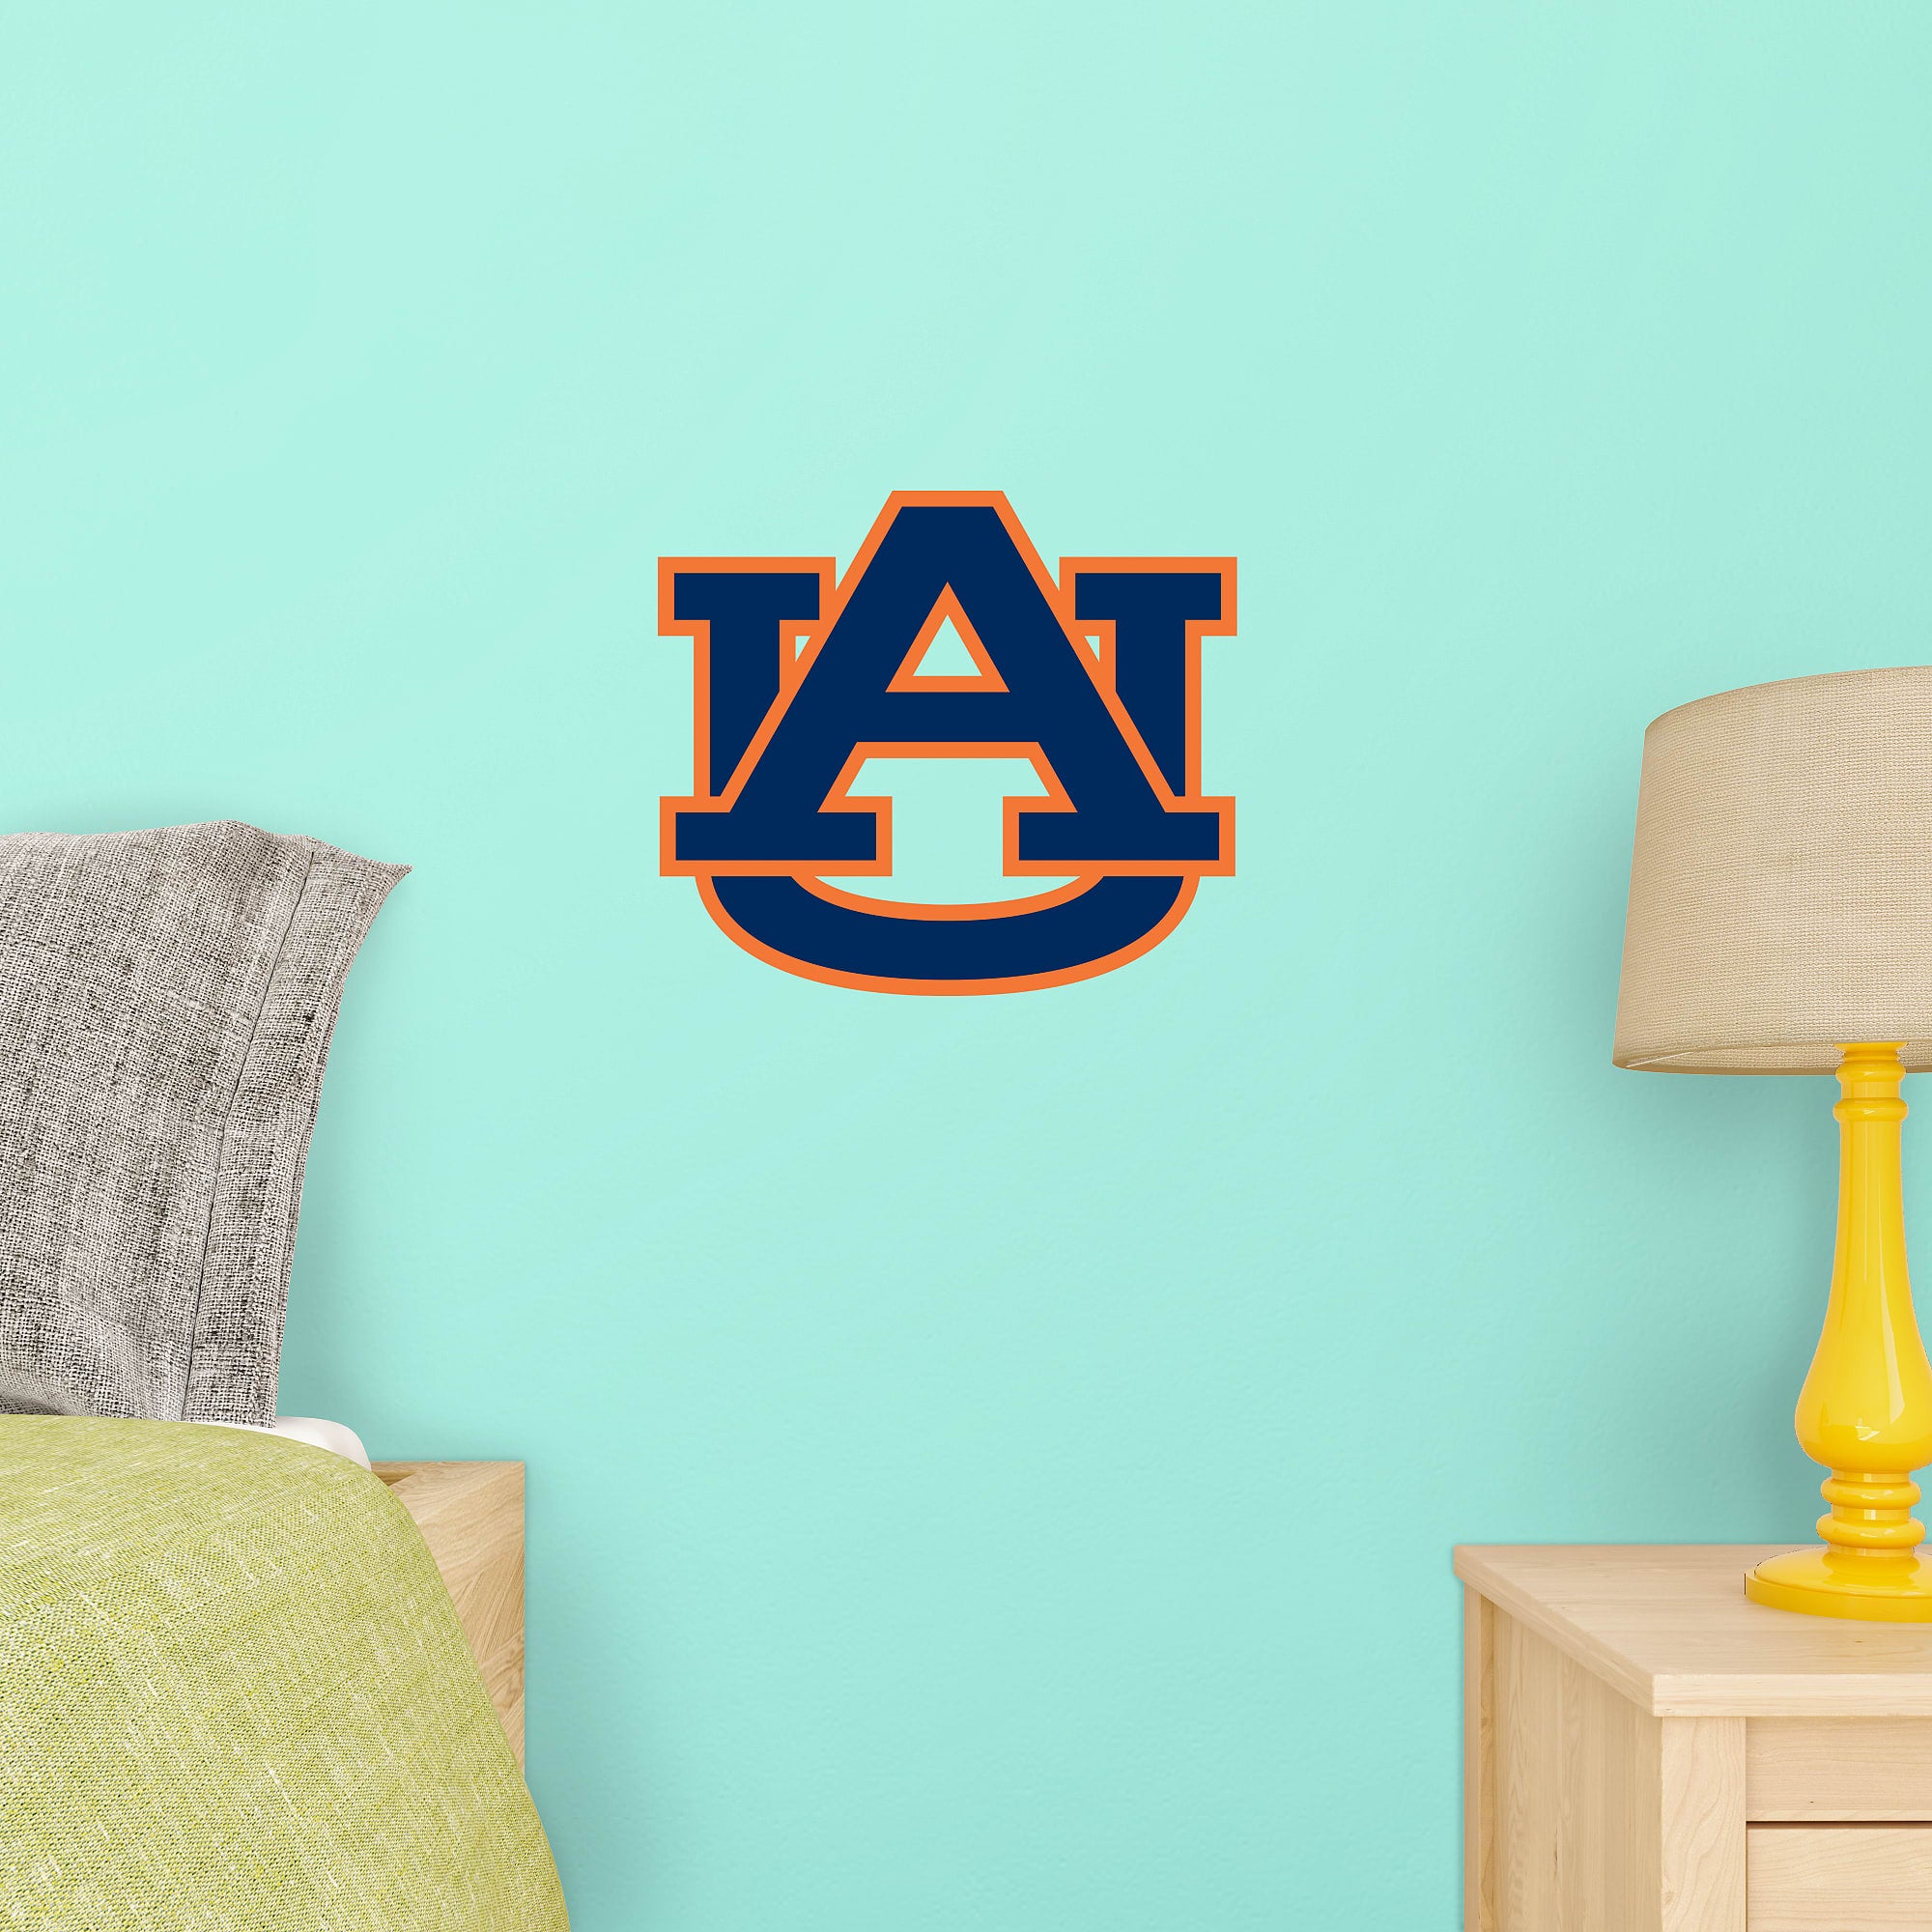 Auburn Tigers: Logo - Officially Licensed Removable Wall Decal 11.0"W x 11.0"H by Fathead | Vinyl